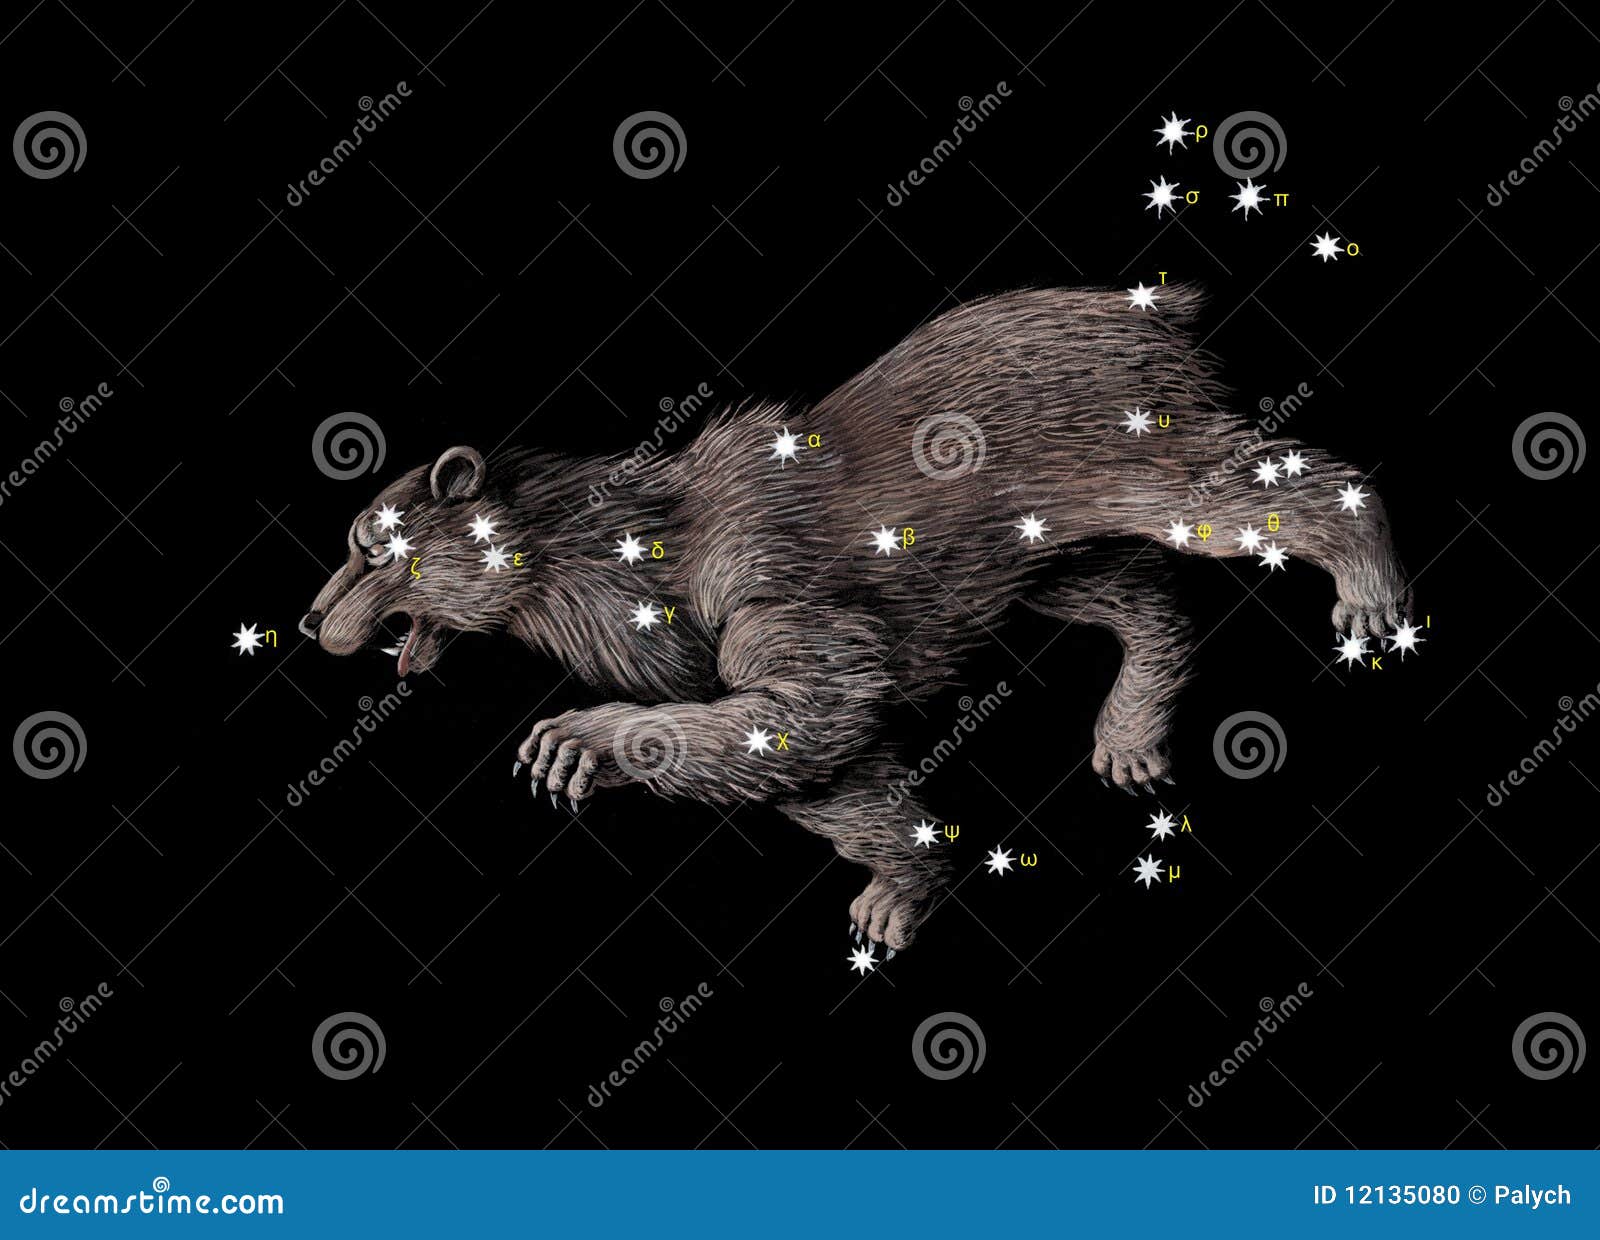 constellation the great bear